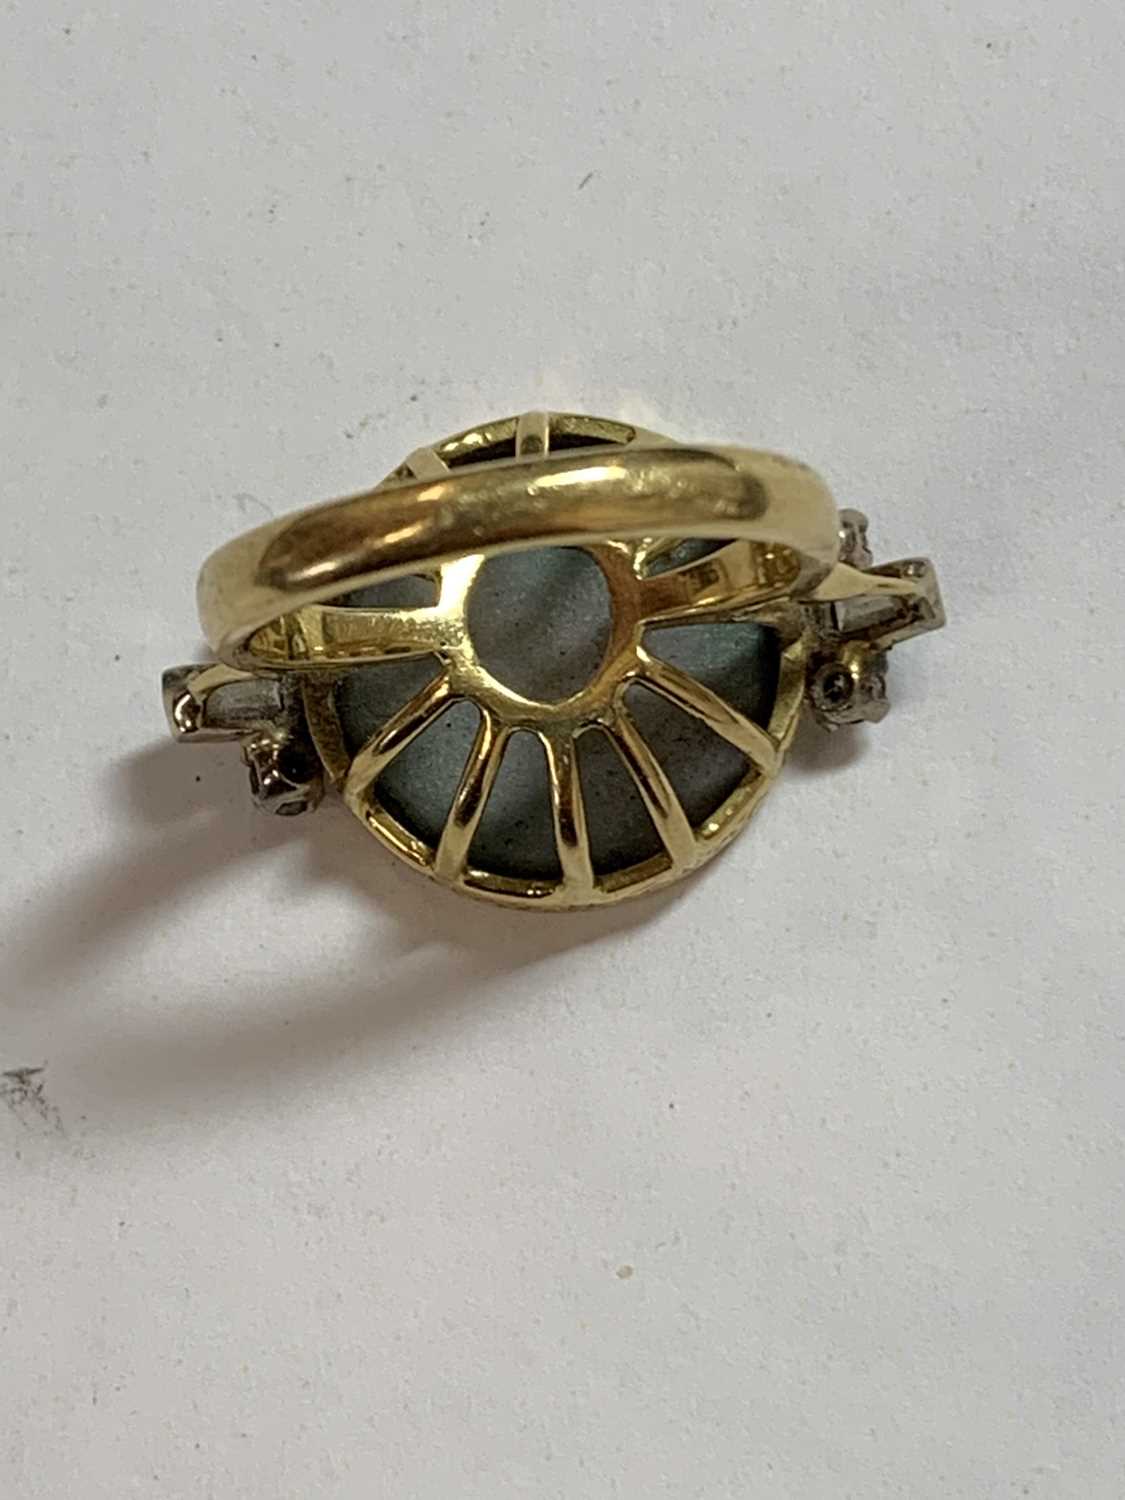 An opal doublet ring and diamond ring - Image 18 of 27